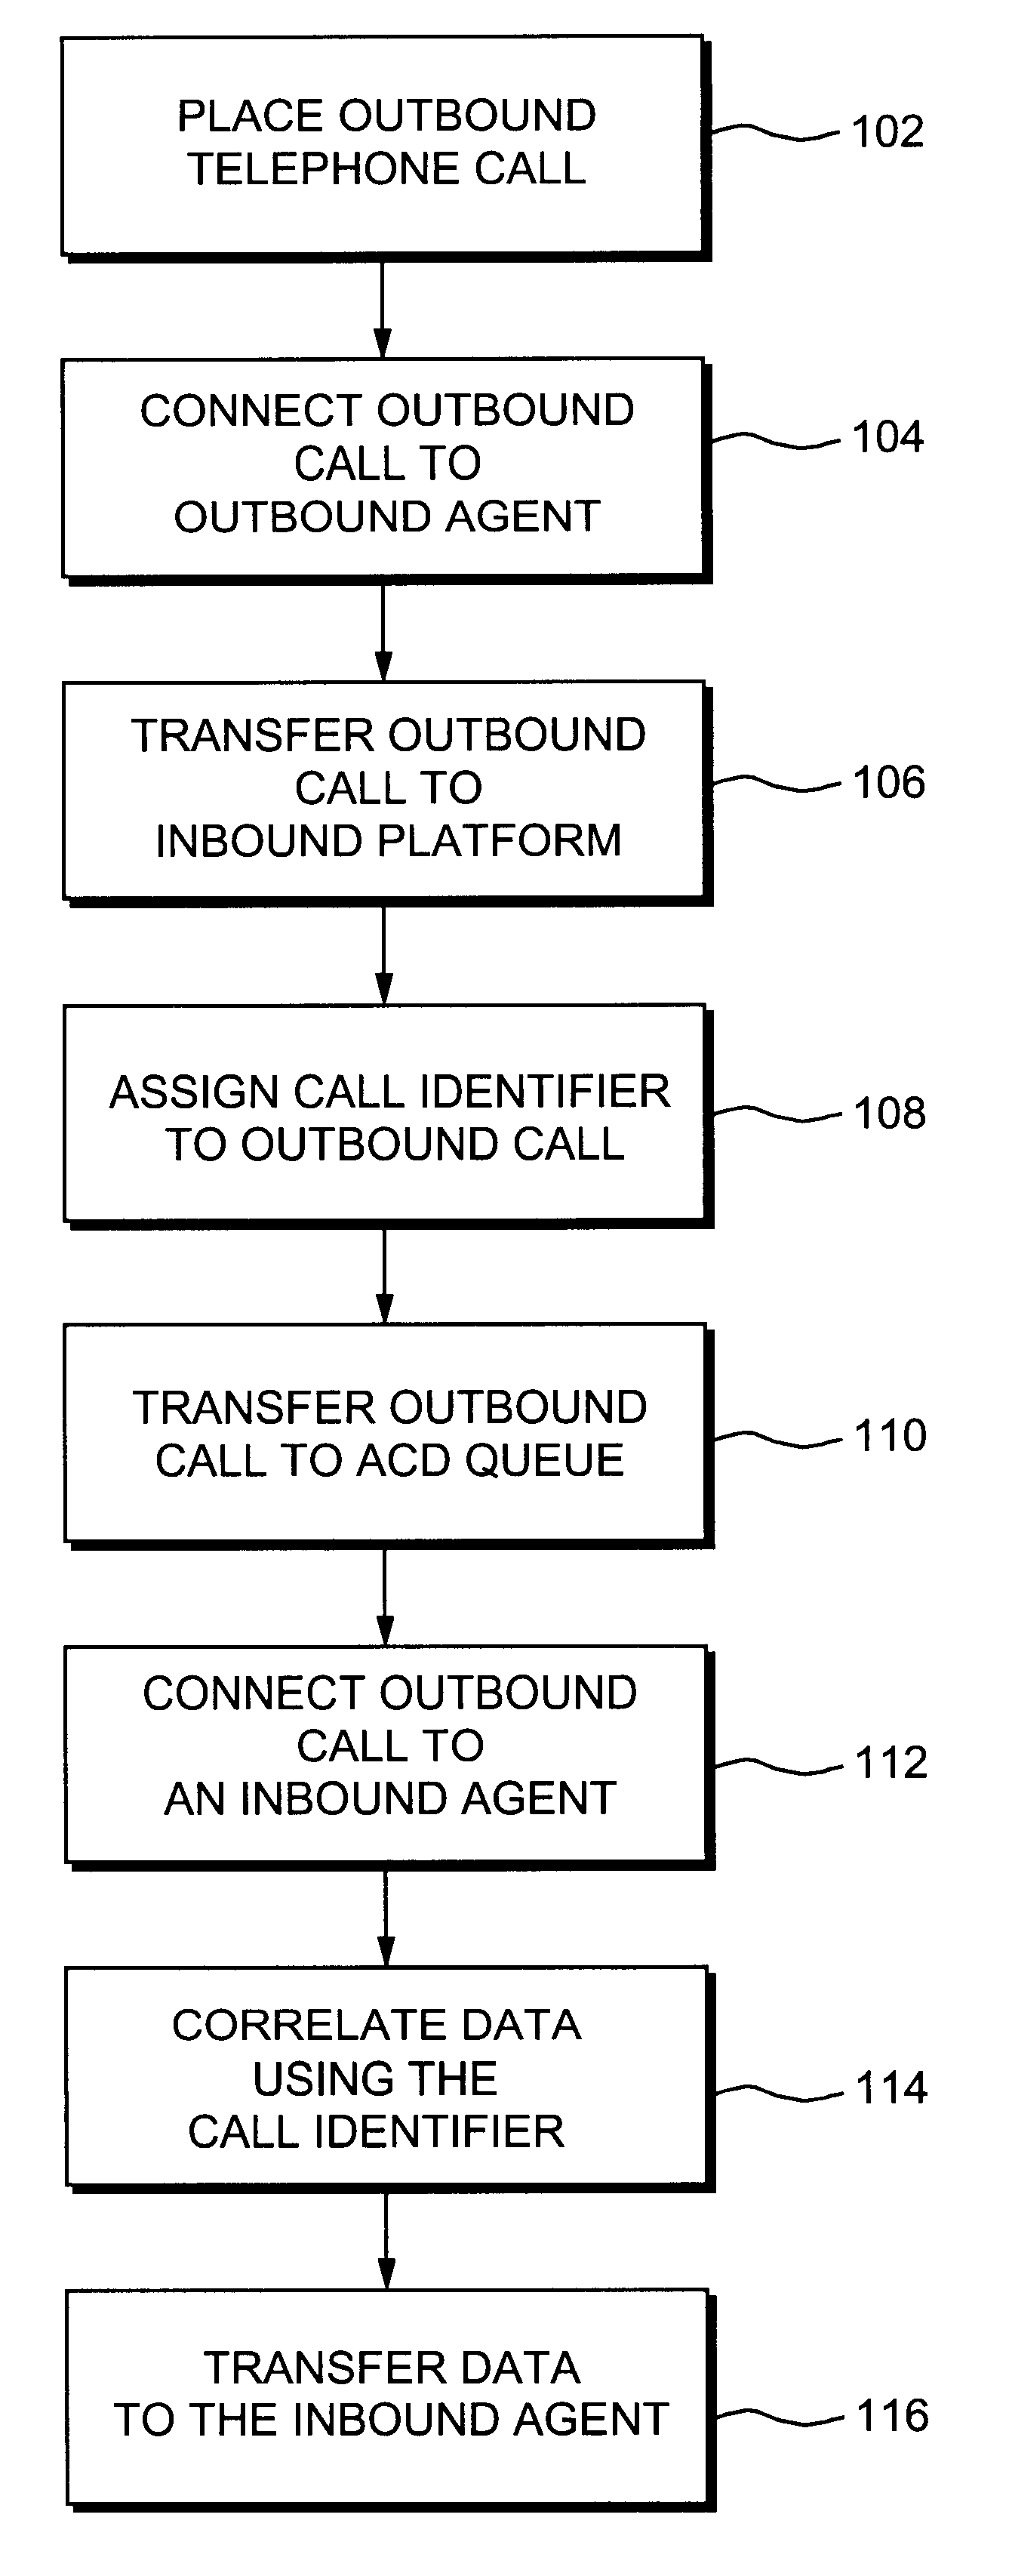 Voice and data transfer from outbound dialing to inbound ACD queue